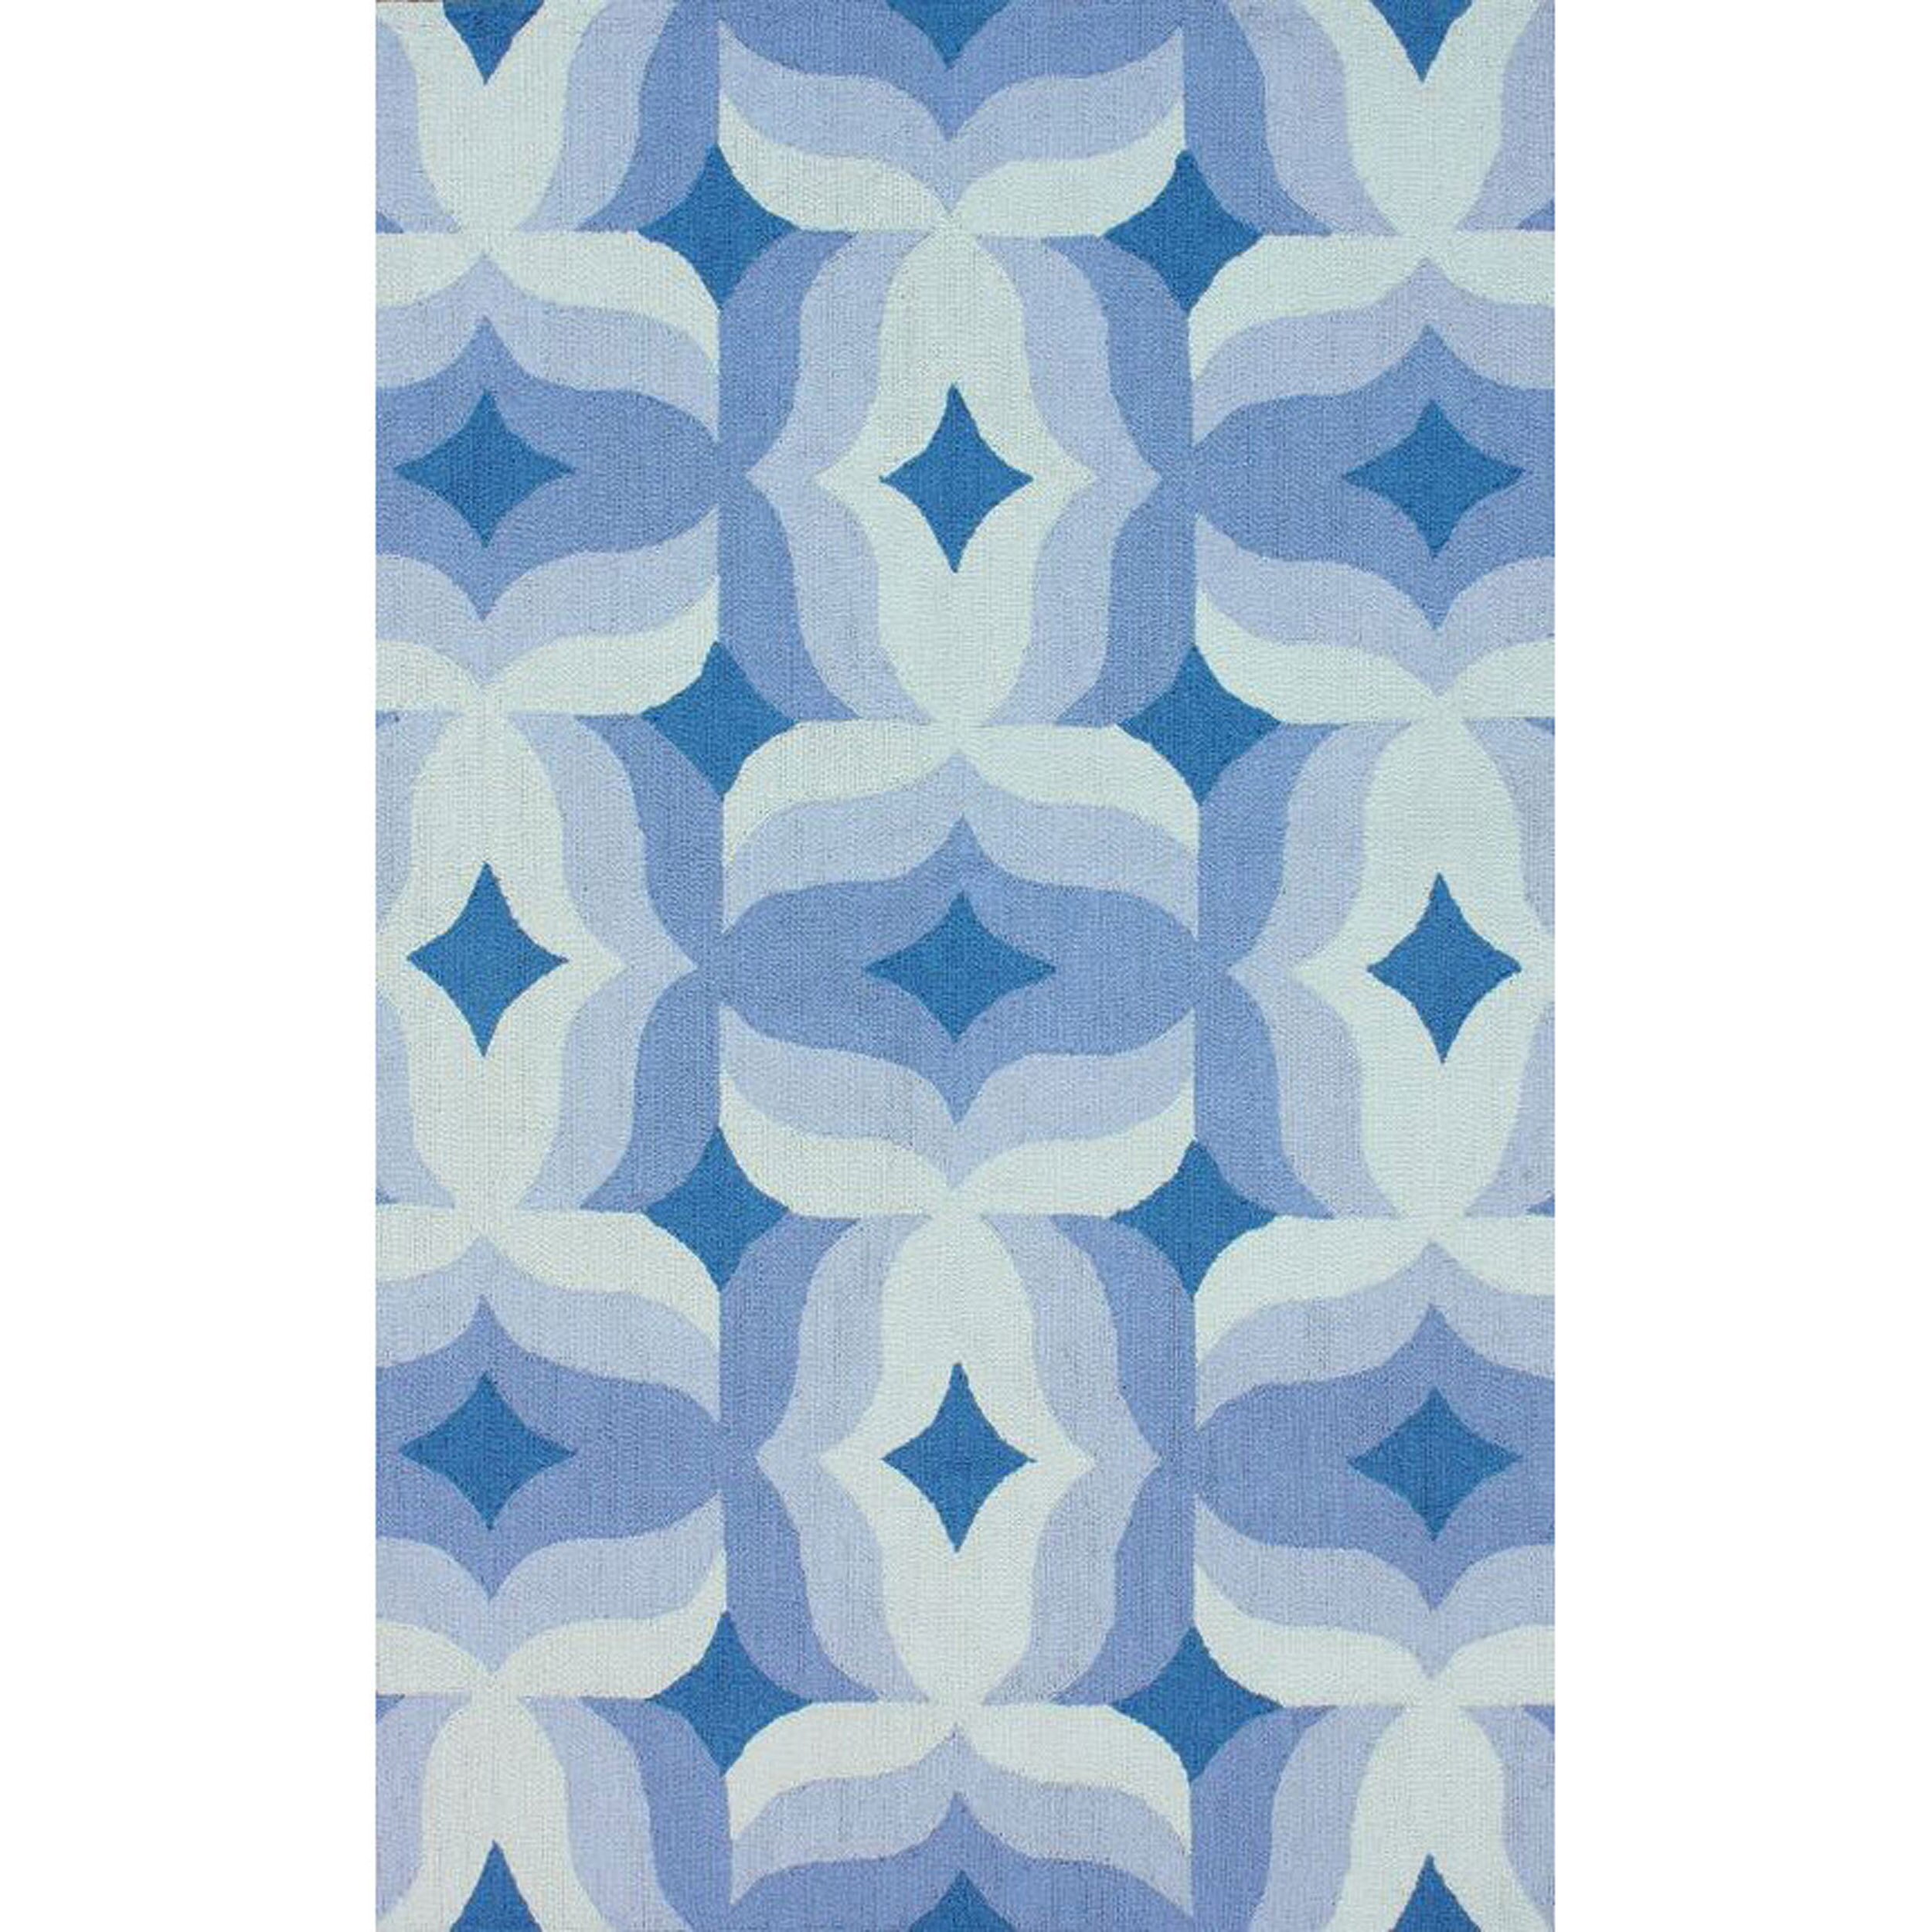 Nuloom Handmade Modern Abstract Blue Wool Rug (5 X 8) (GreyPattern AbstractTip We recommend the use of a non skid pad to keep the rug in place on smooth surfaces.All rug sizes are approximate. Due to the difference of monitor colors, some rug colors may